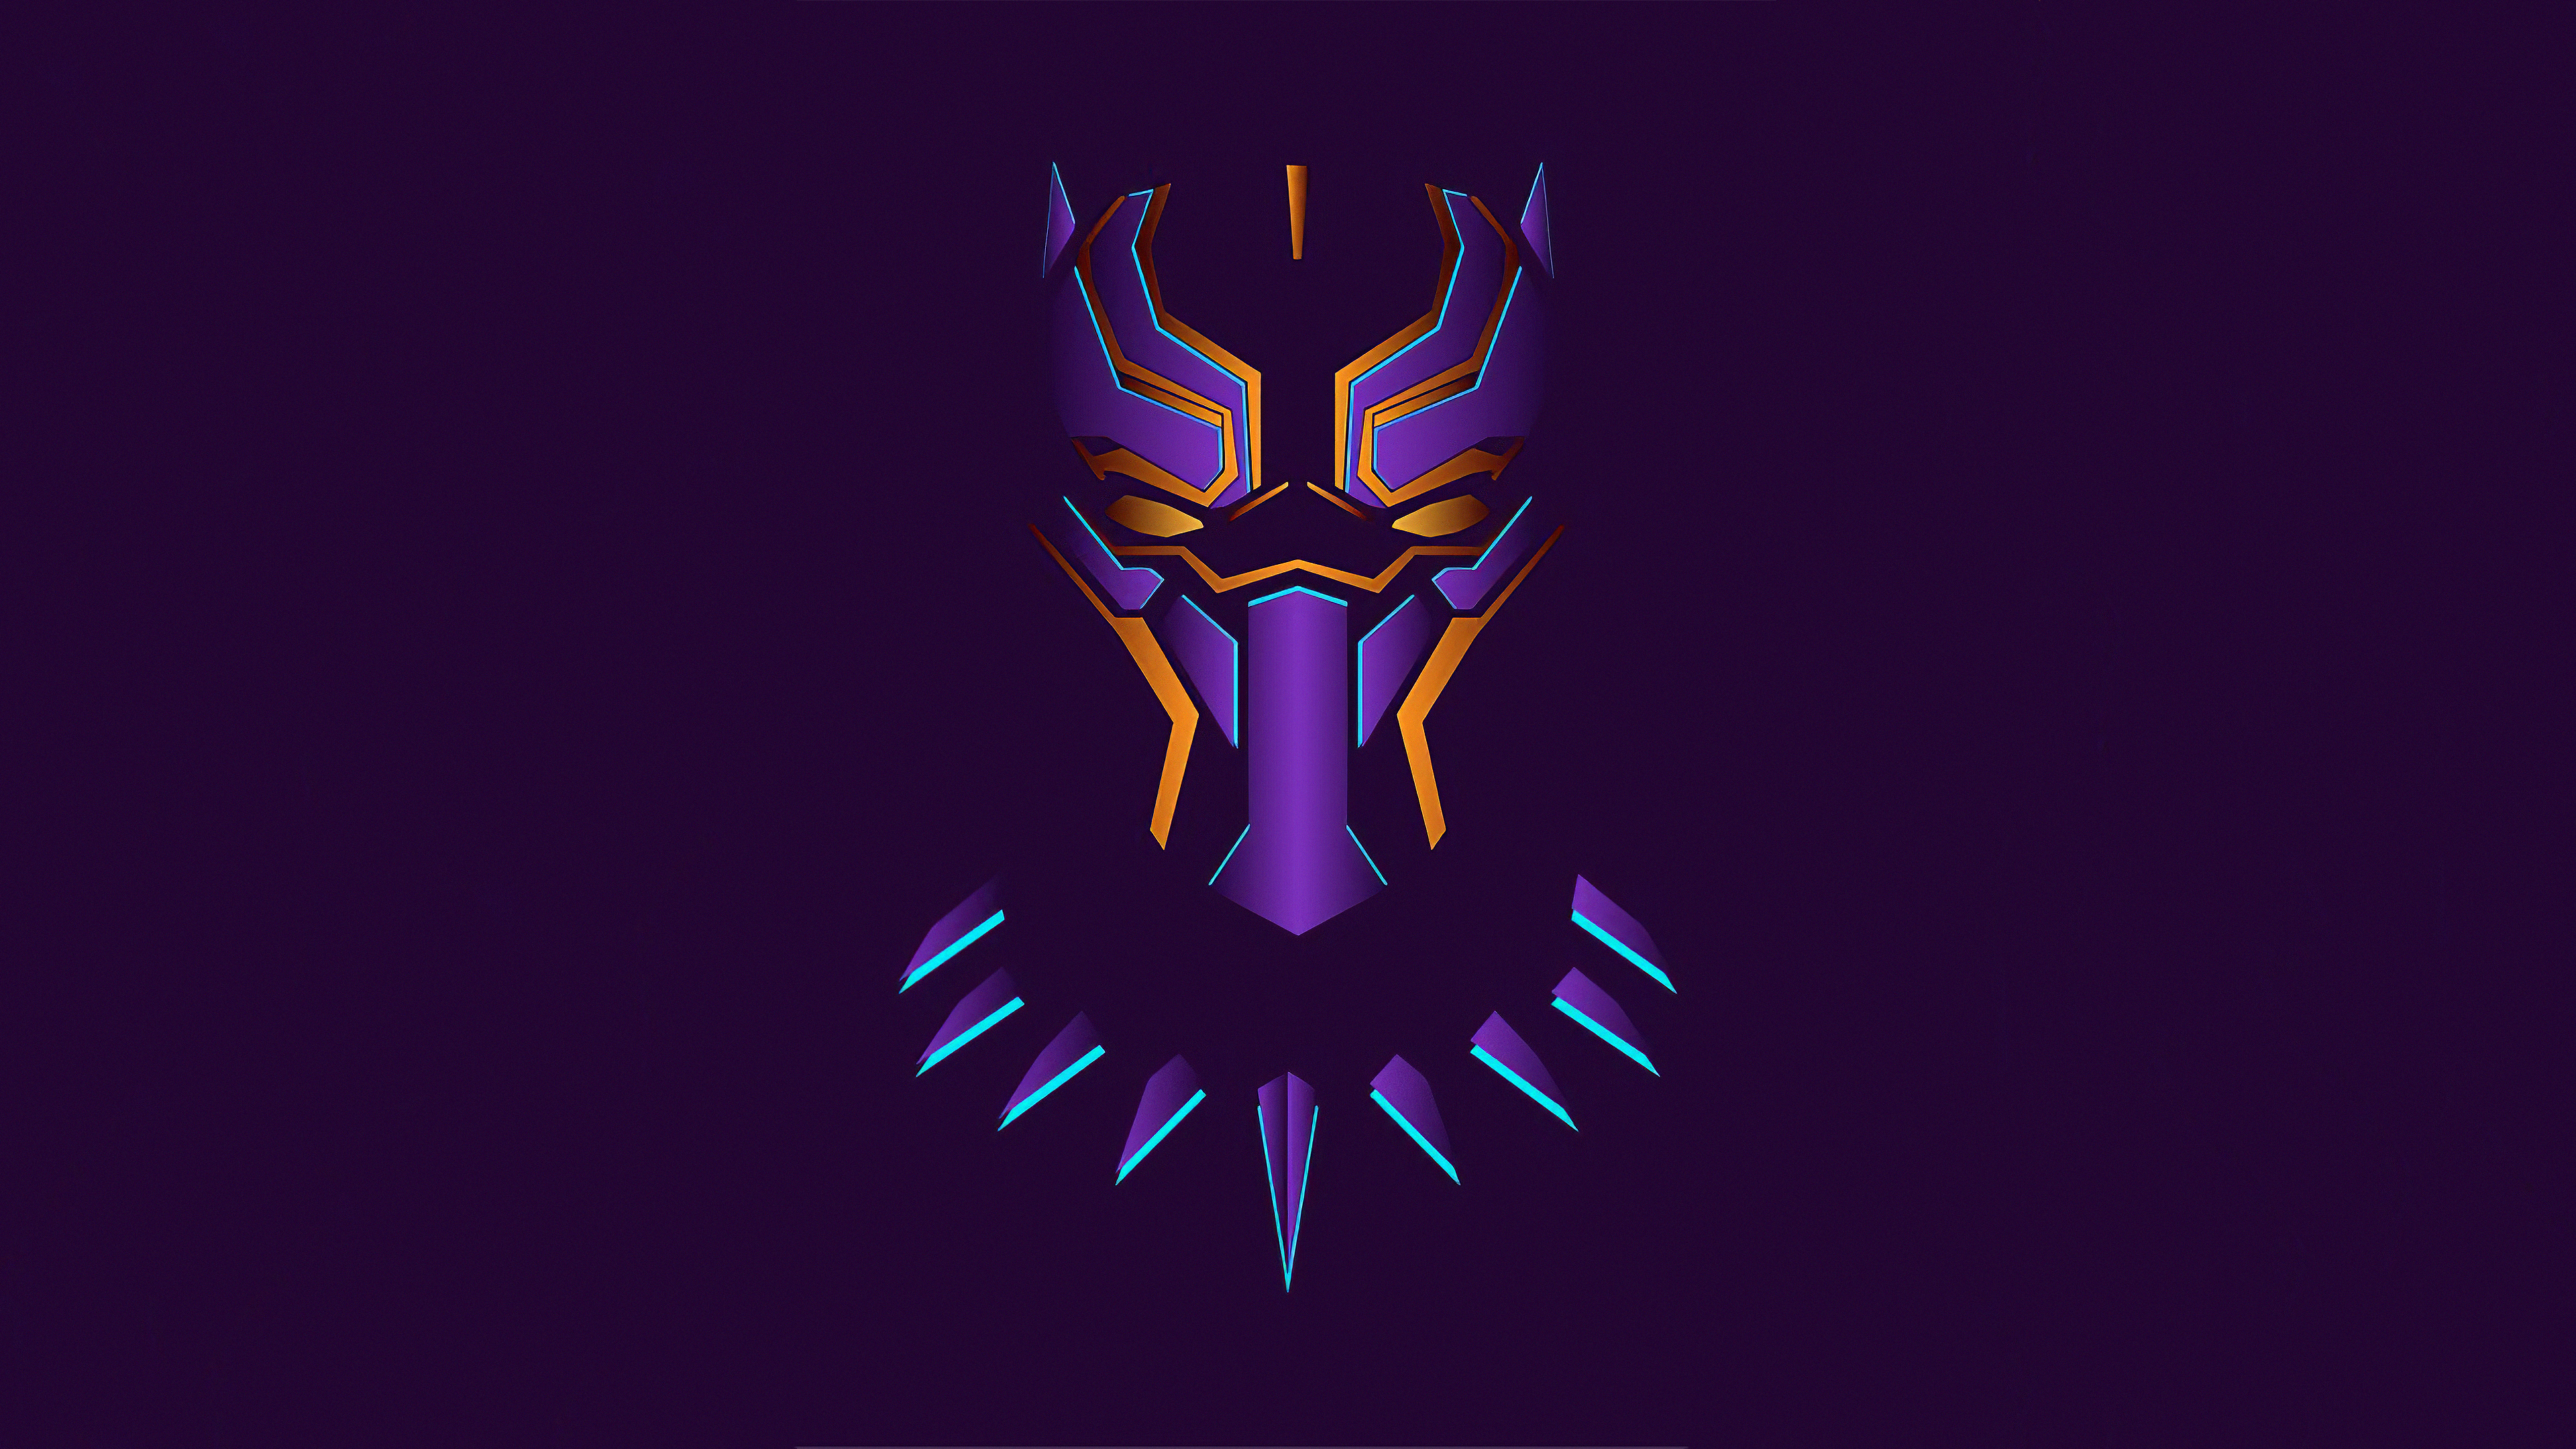 New Black Panther Minimalist Wallpaper, HD Minimalist 4K Wallpapers,  Images, Photos and Background - Wallpapers Den